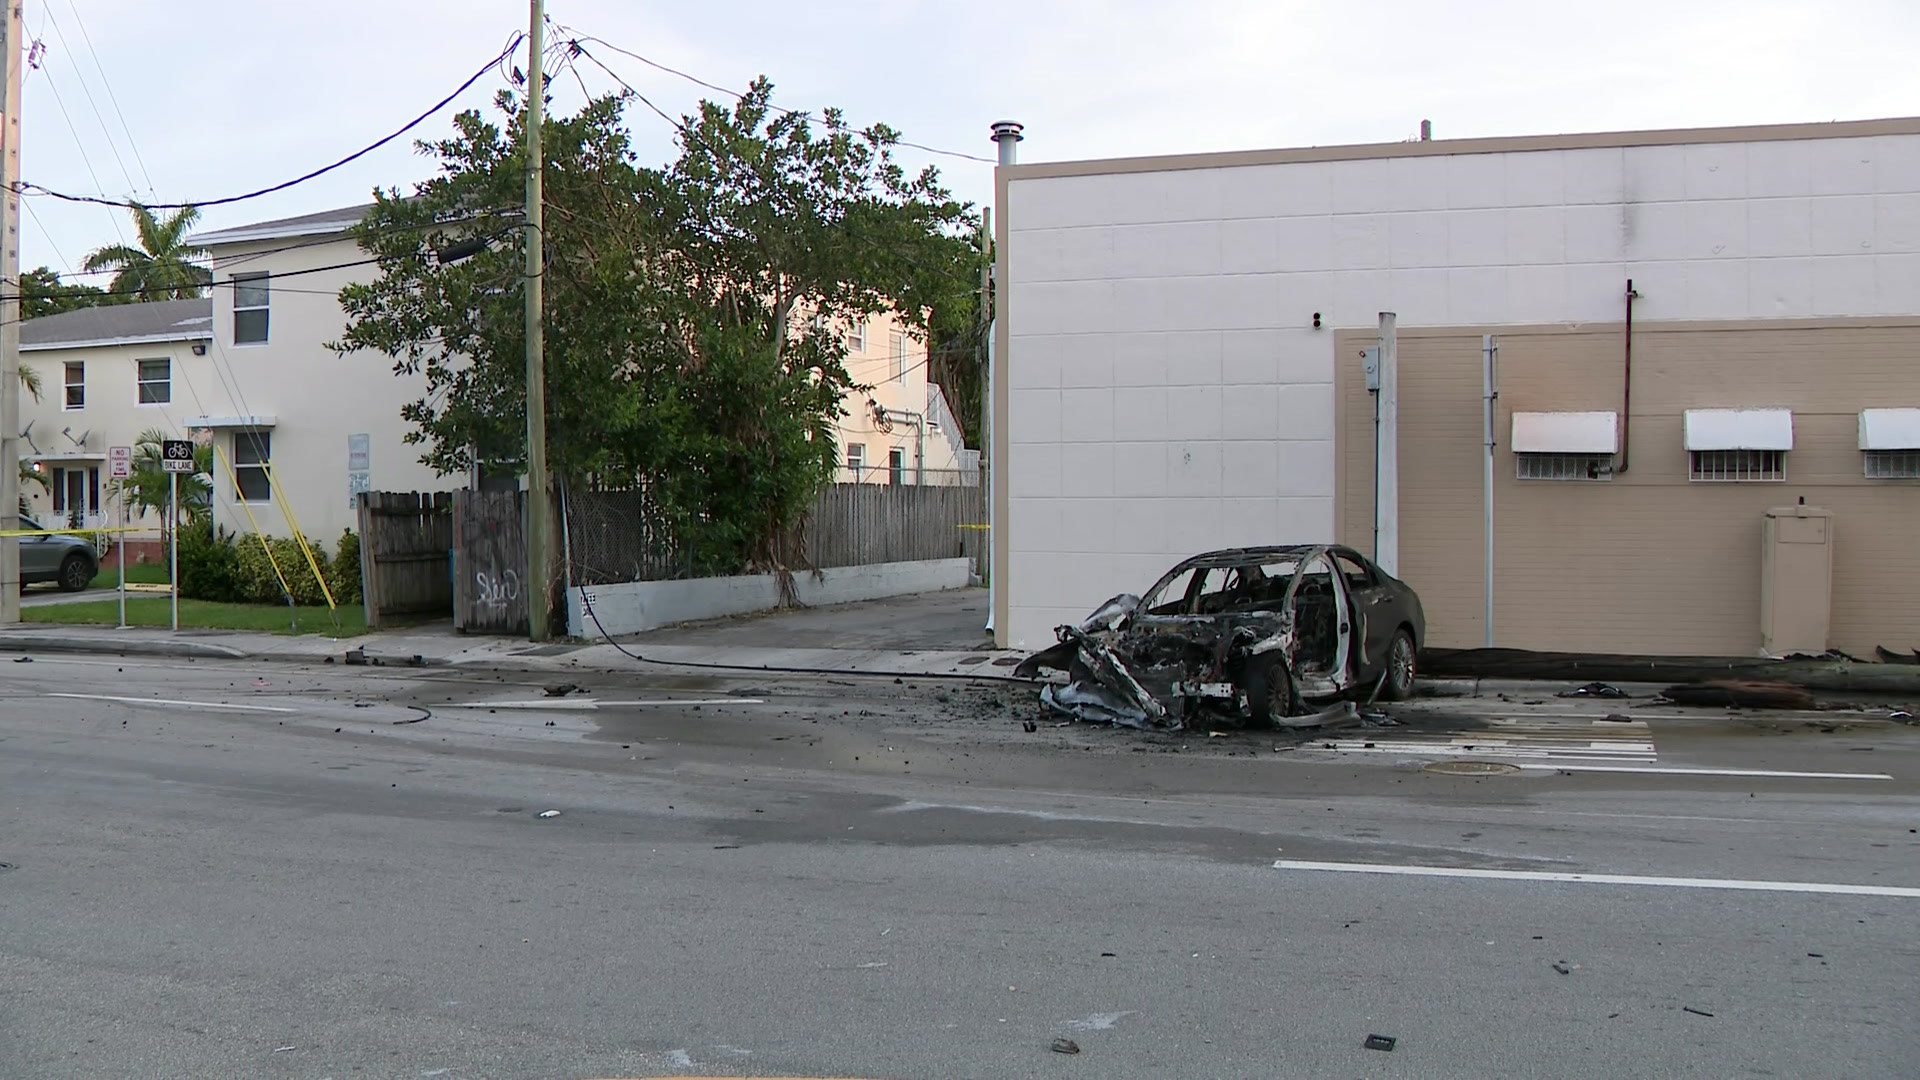 Police: Woman’s License Suspended 7 Times Before Fiery, Deadly Crash On Biscayne Blvd.